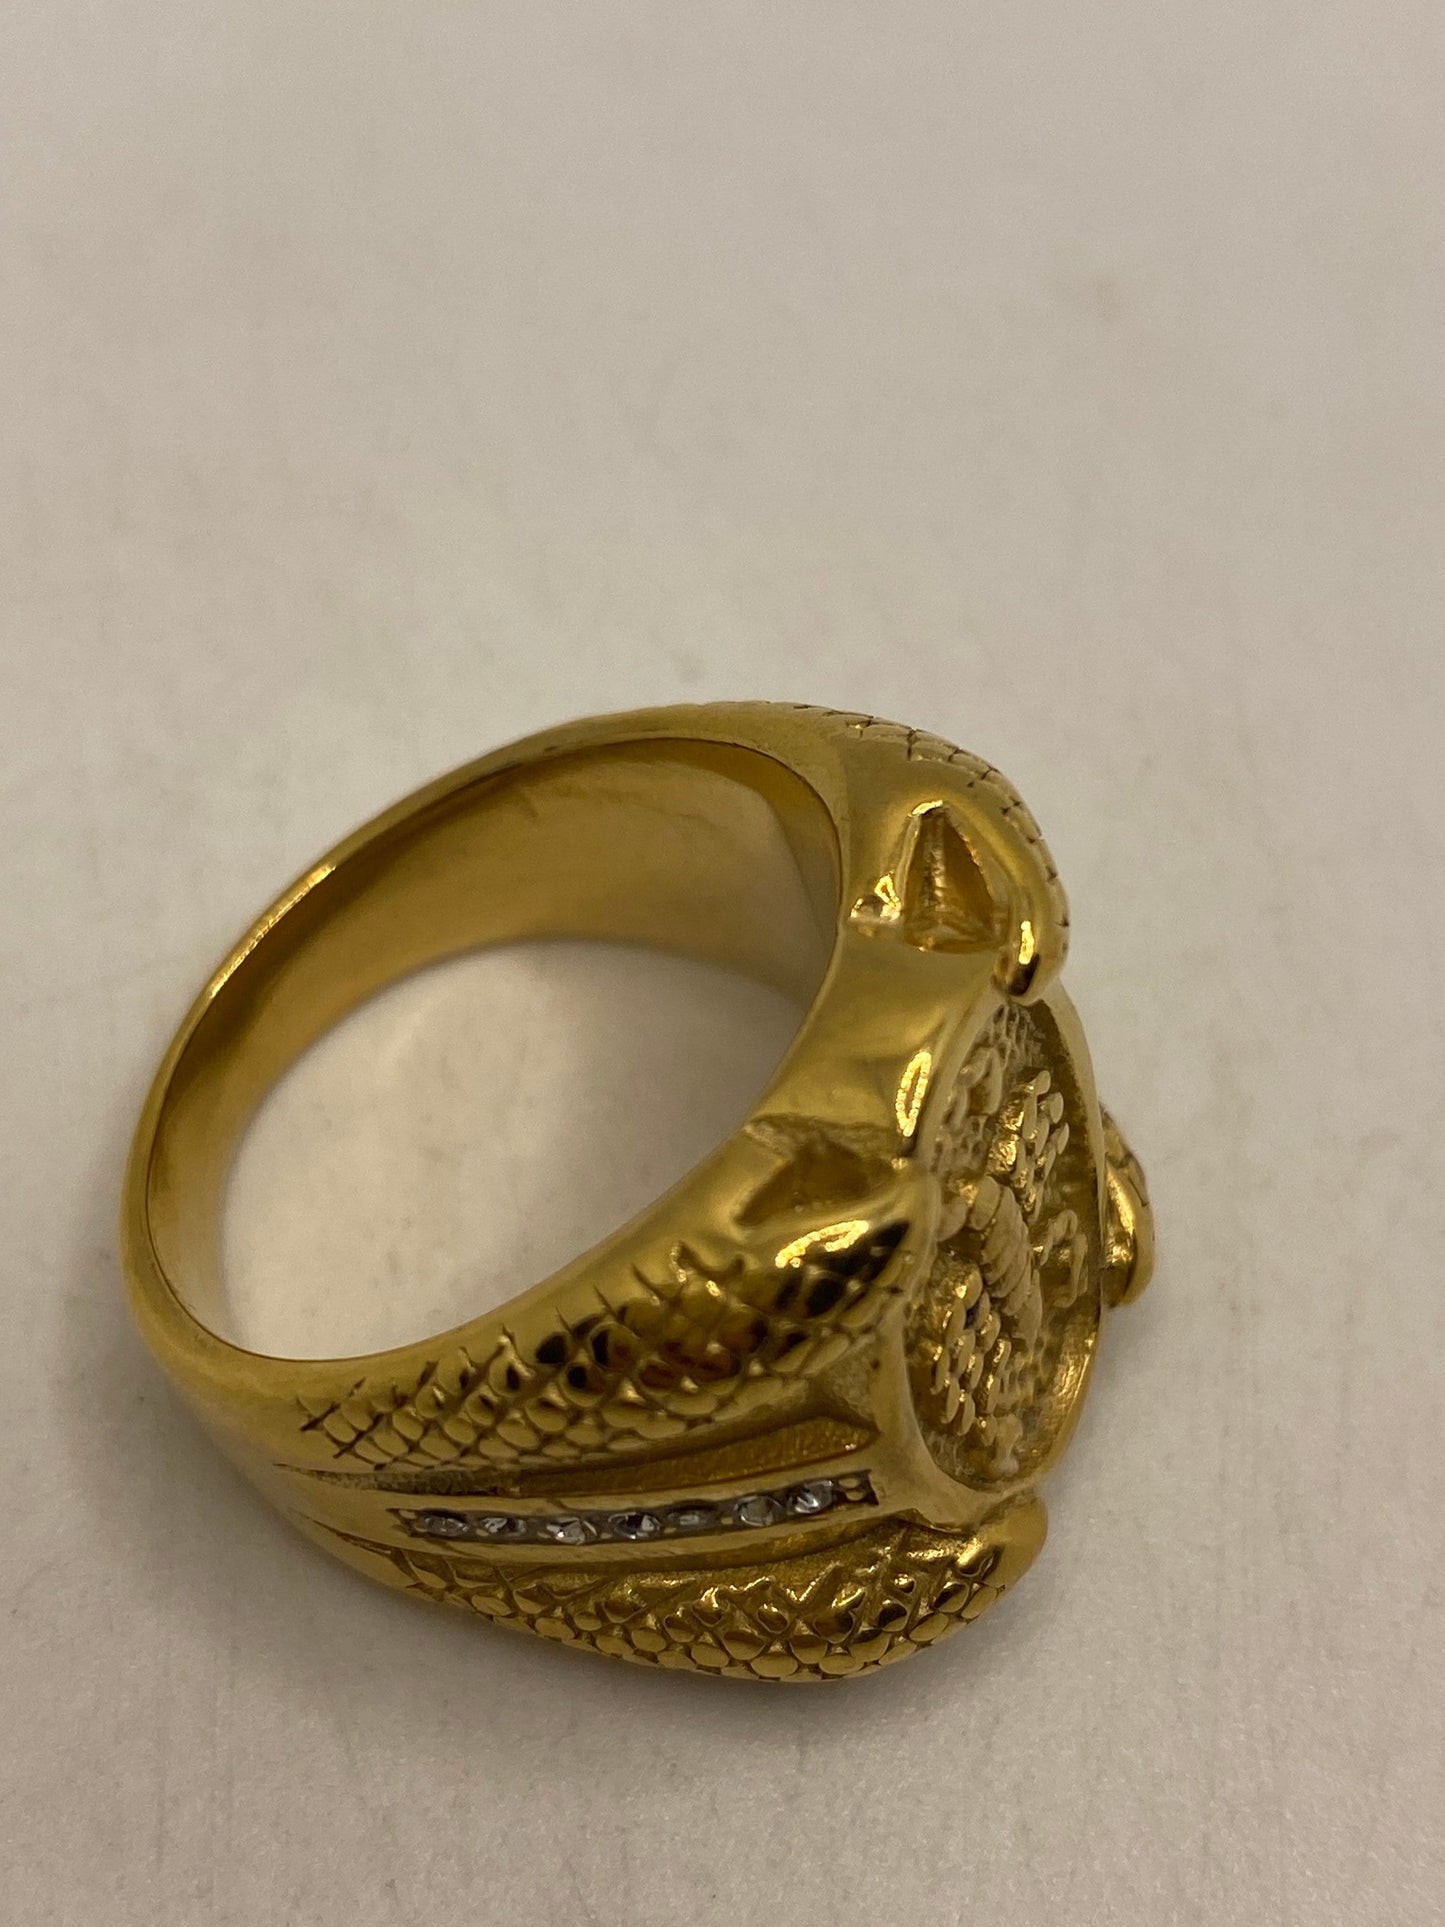 Vintage Yellow Gold Scorpion Stainless Steel Ring Size 10